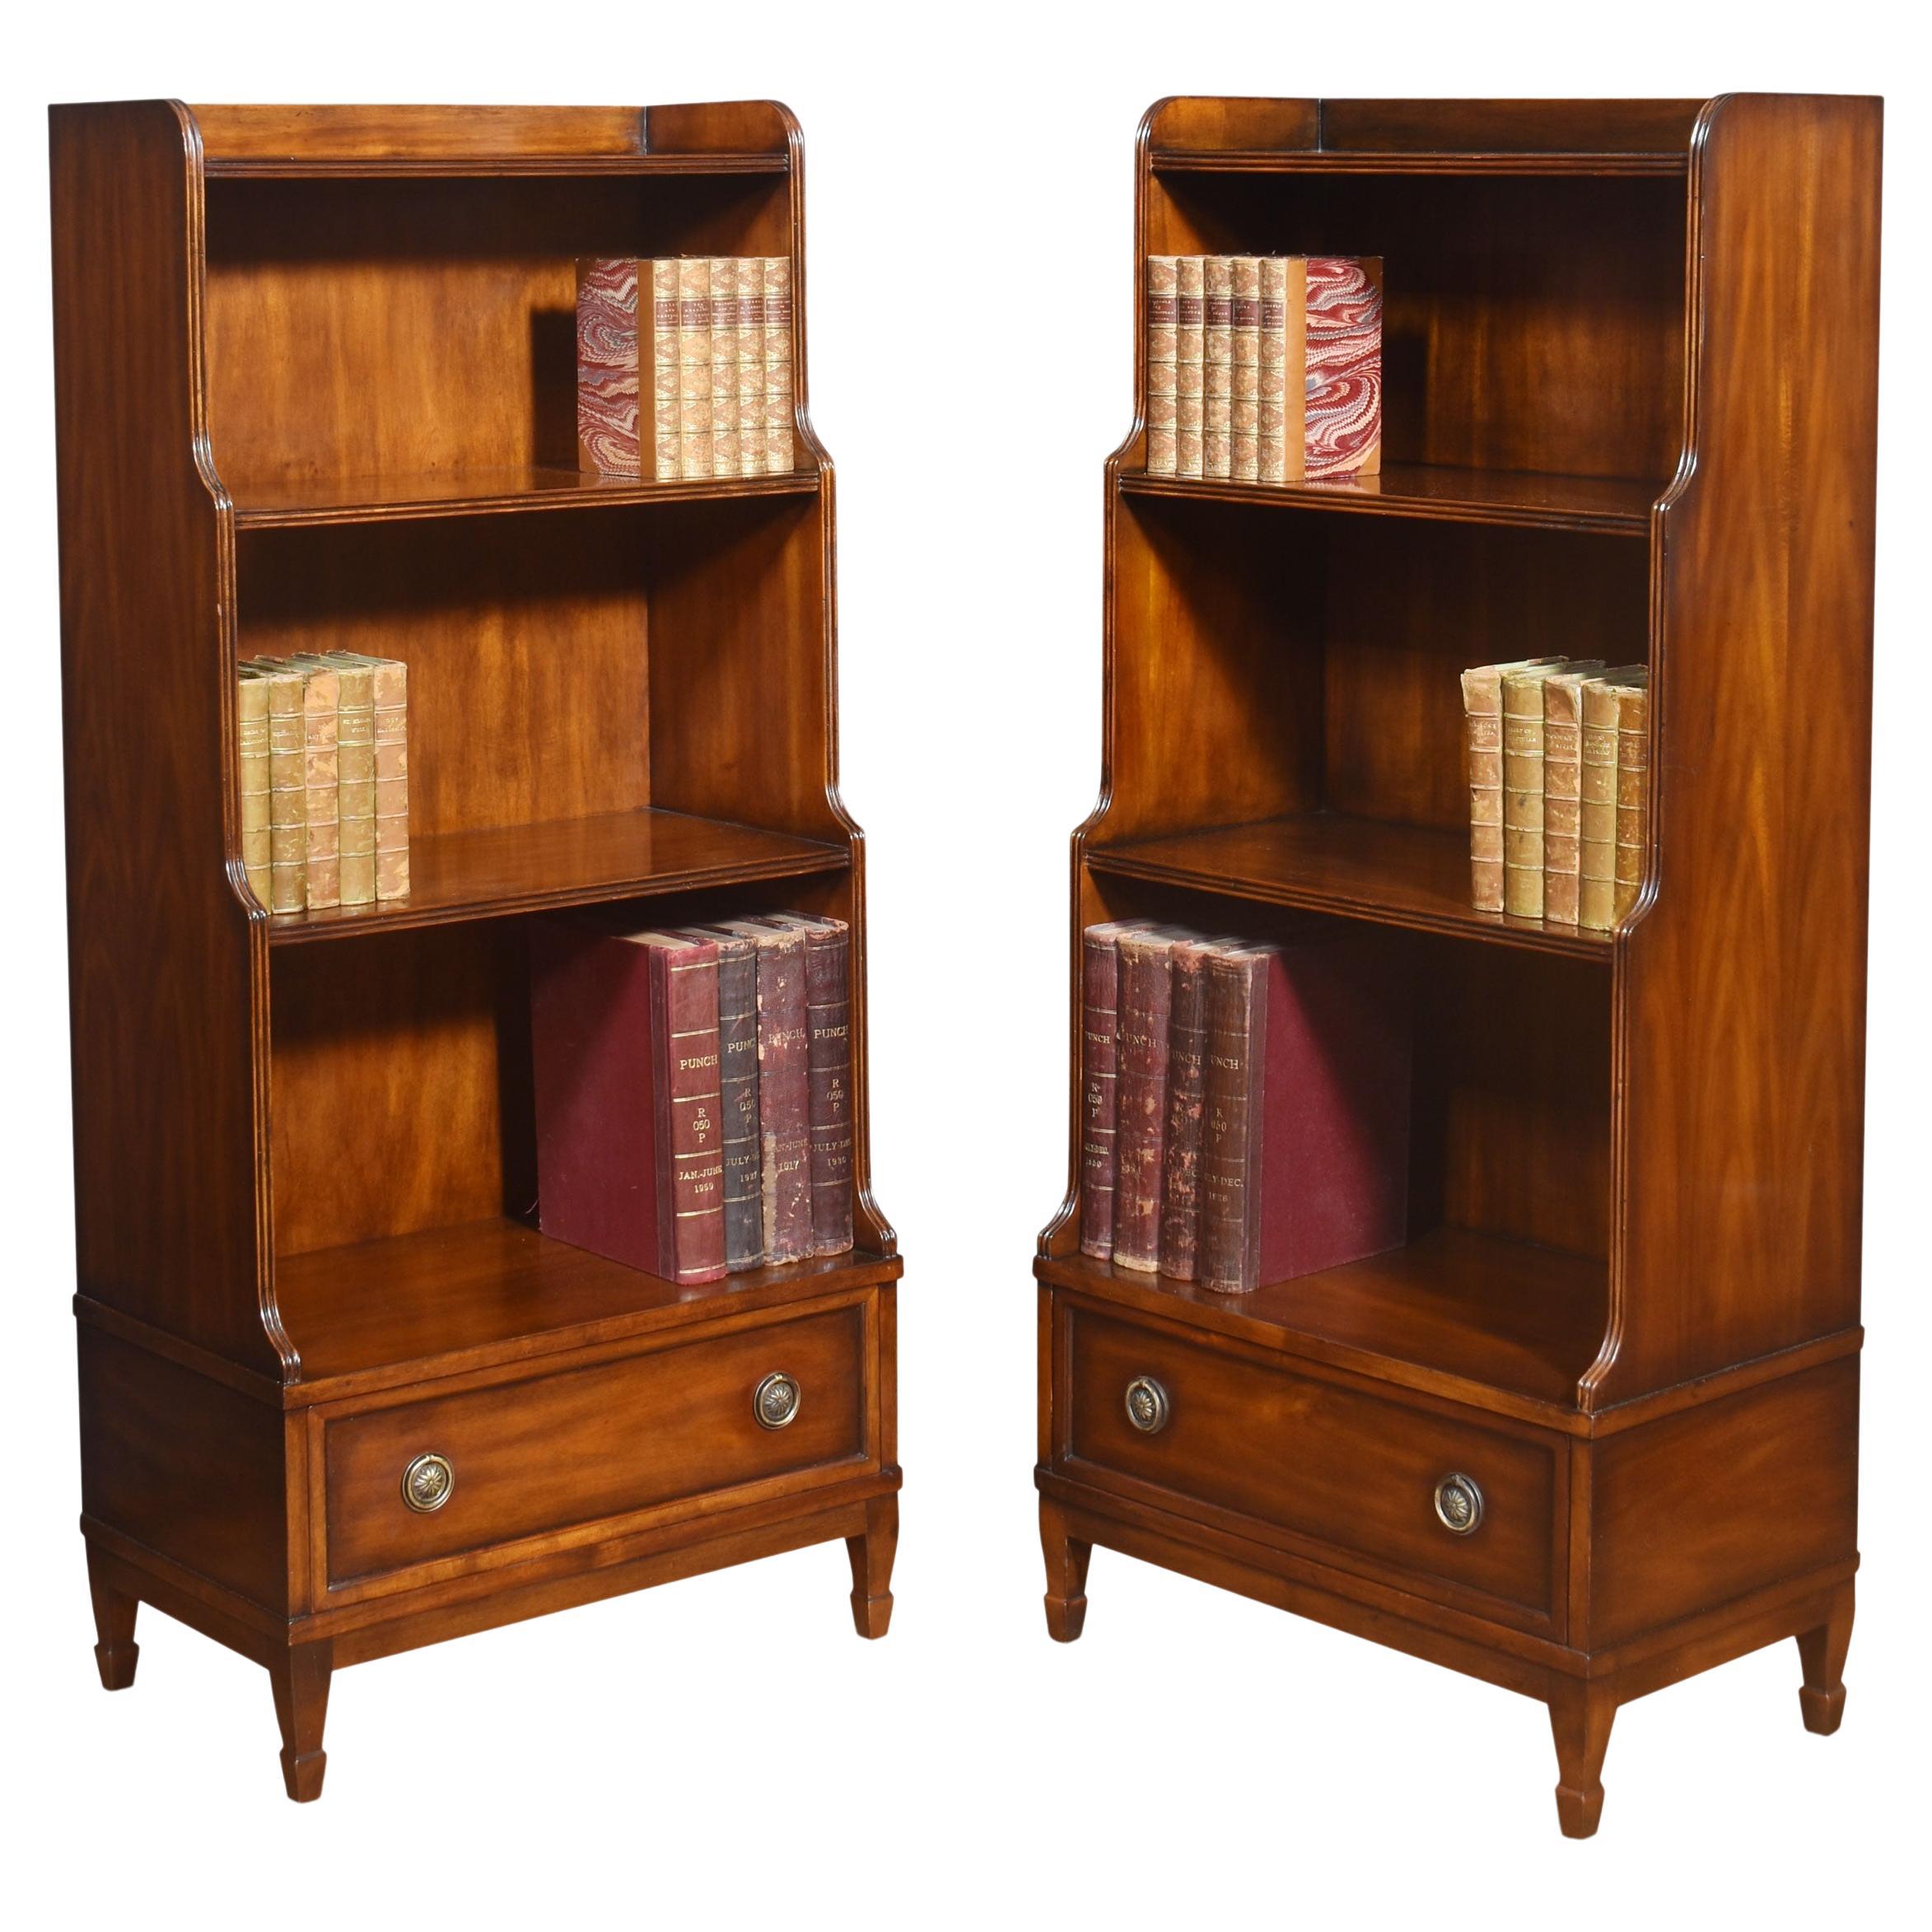 Pair of waterfall bookcases For Sale